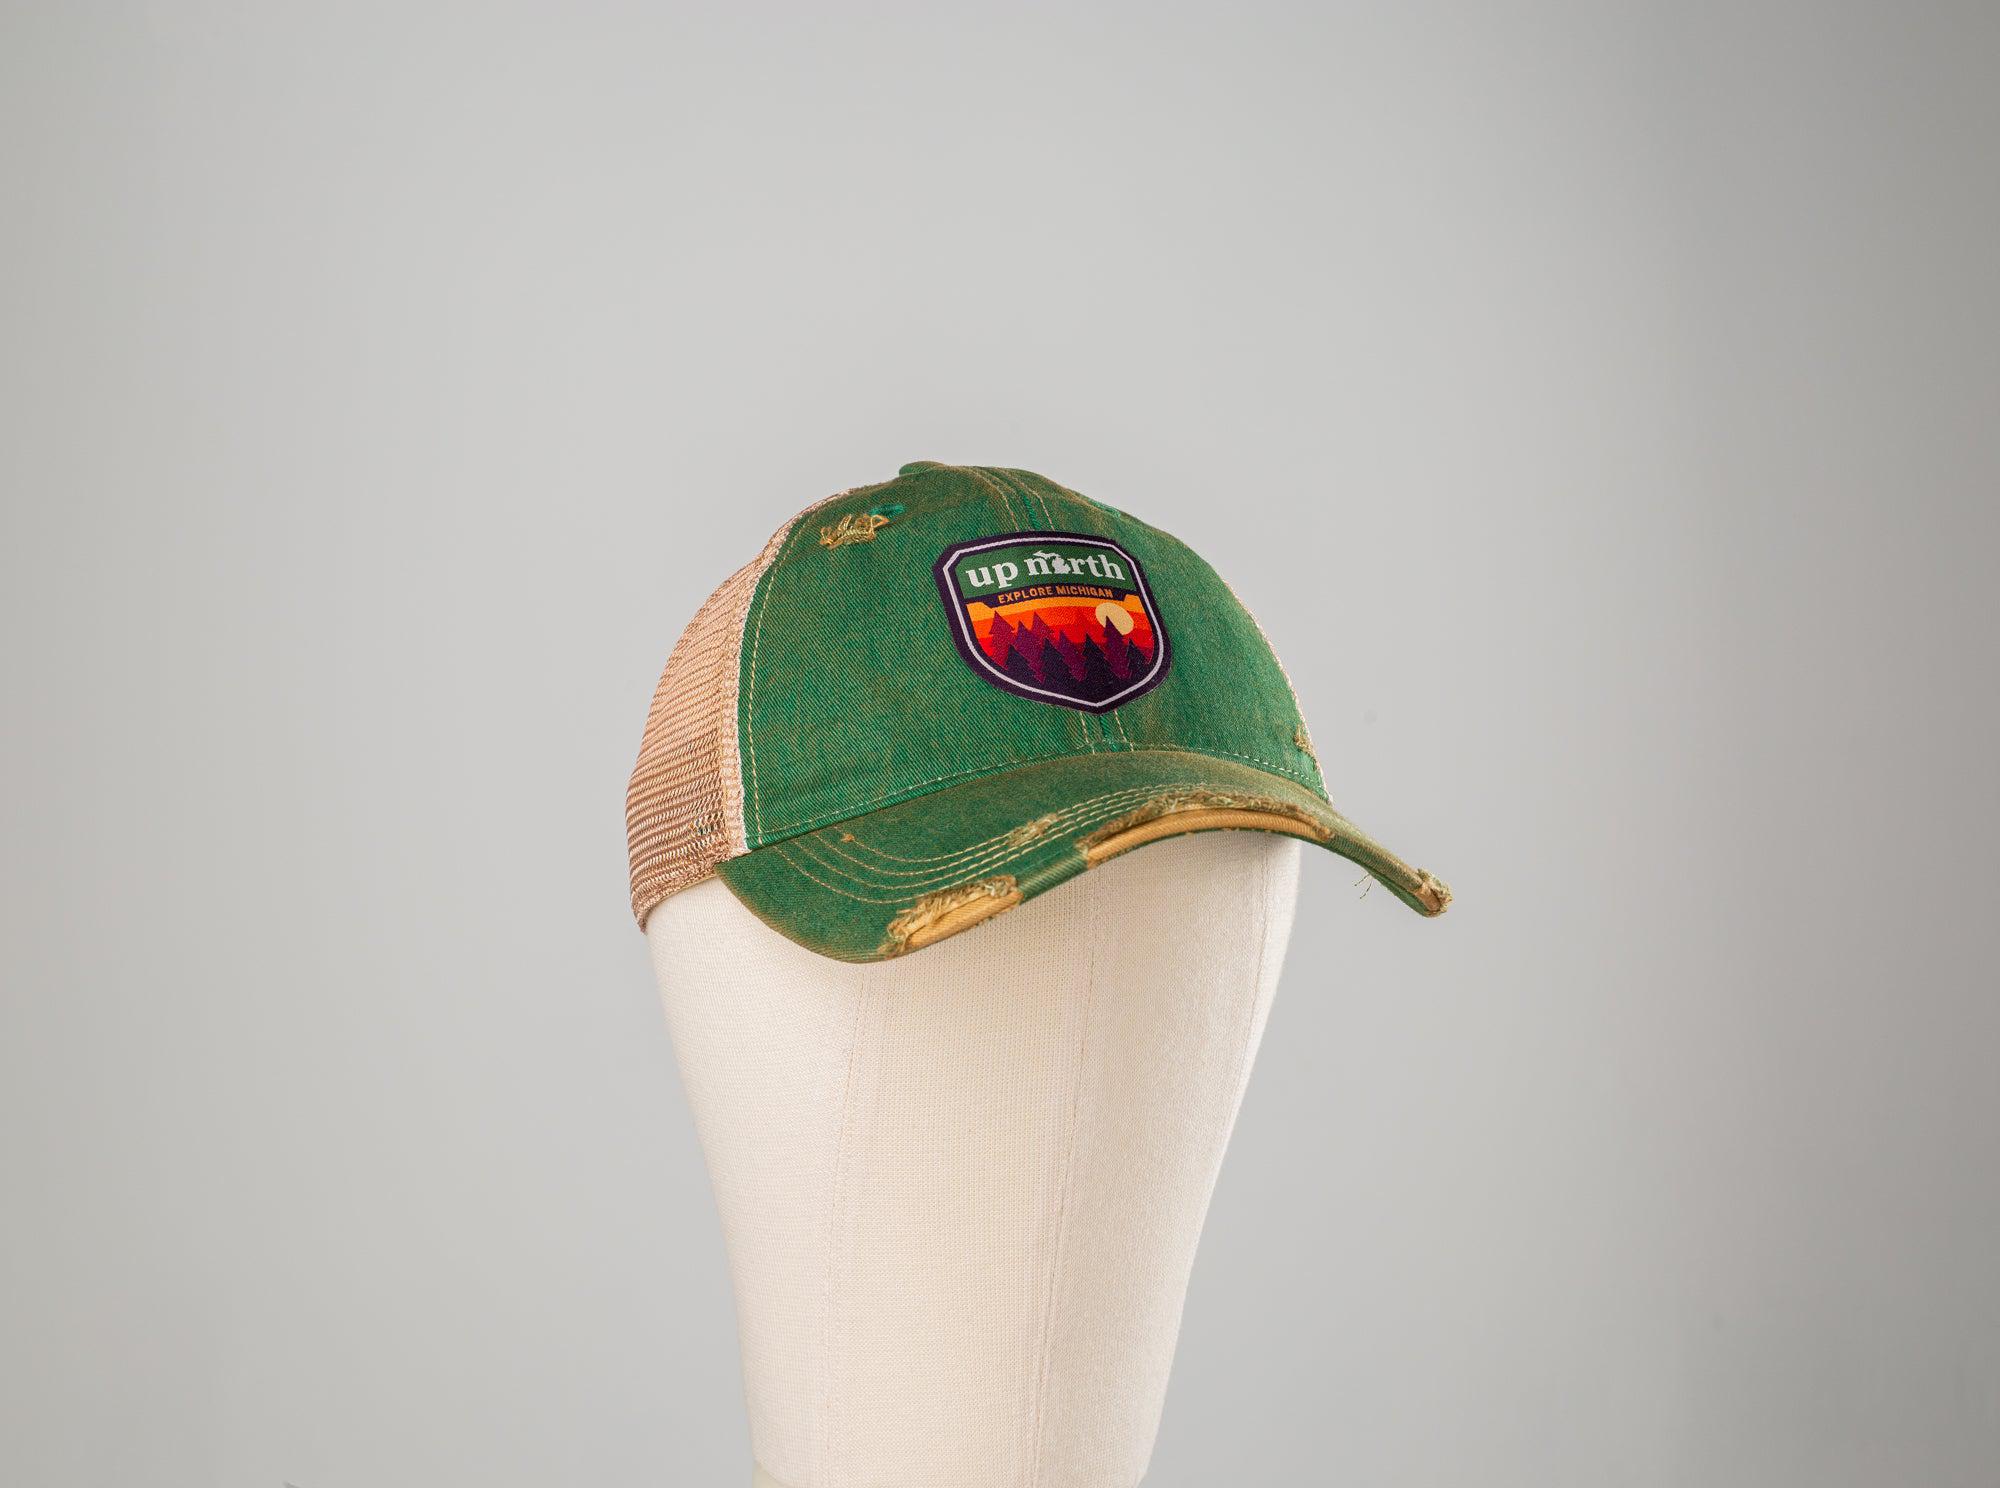 Up North Woven Patch Hat